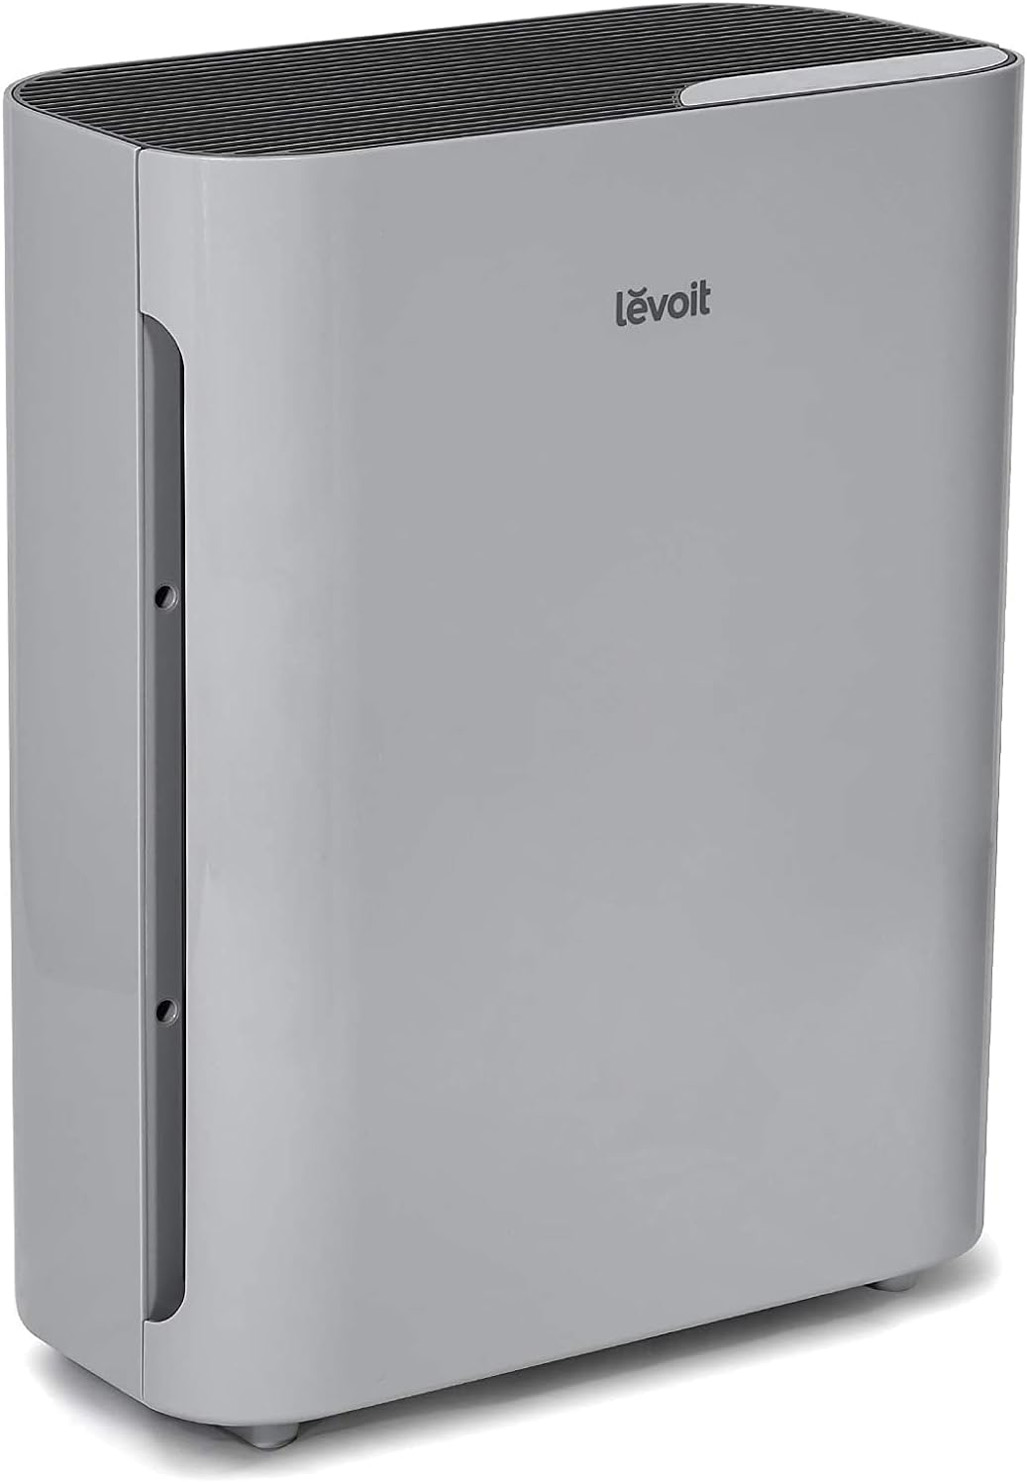 LEVOIT Air Purifiers for Home Large Room, HEPA Filter Cleaner, Grey